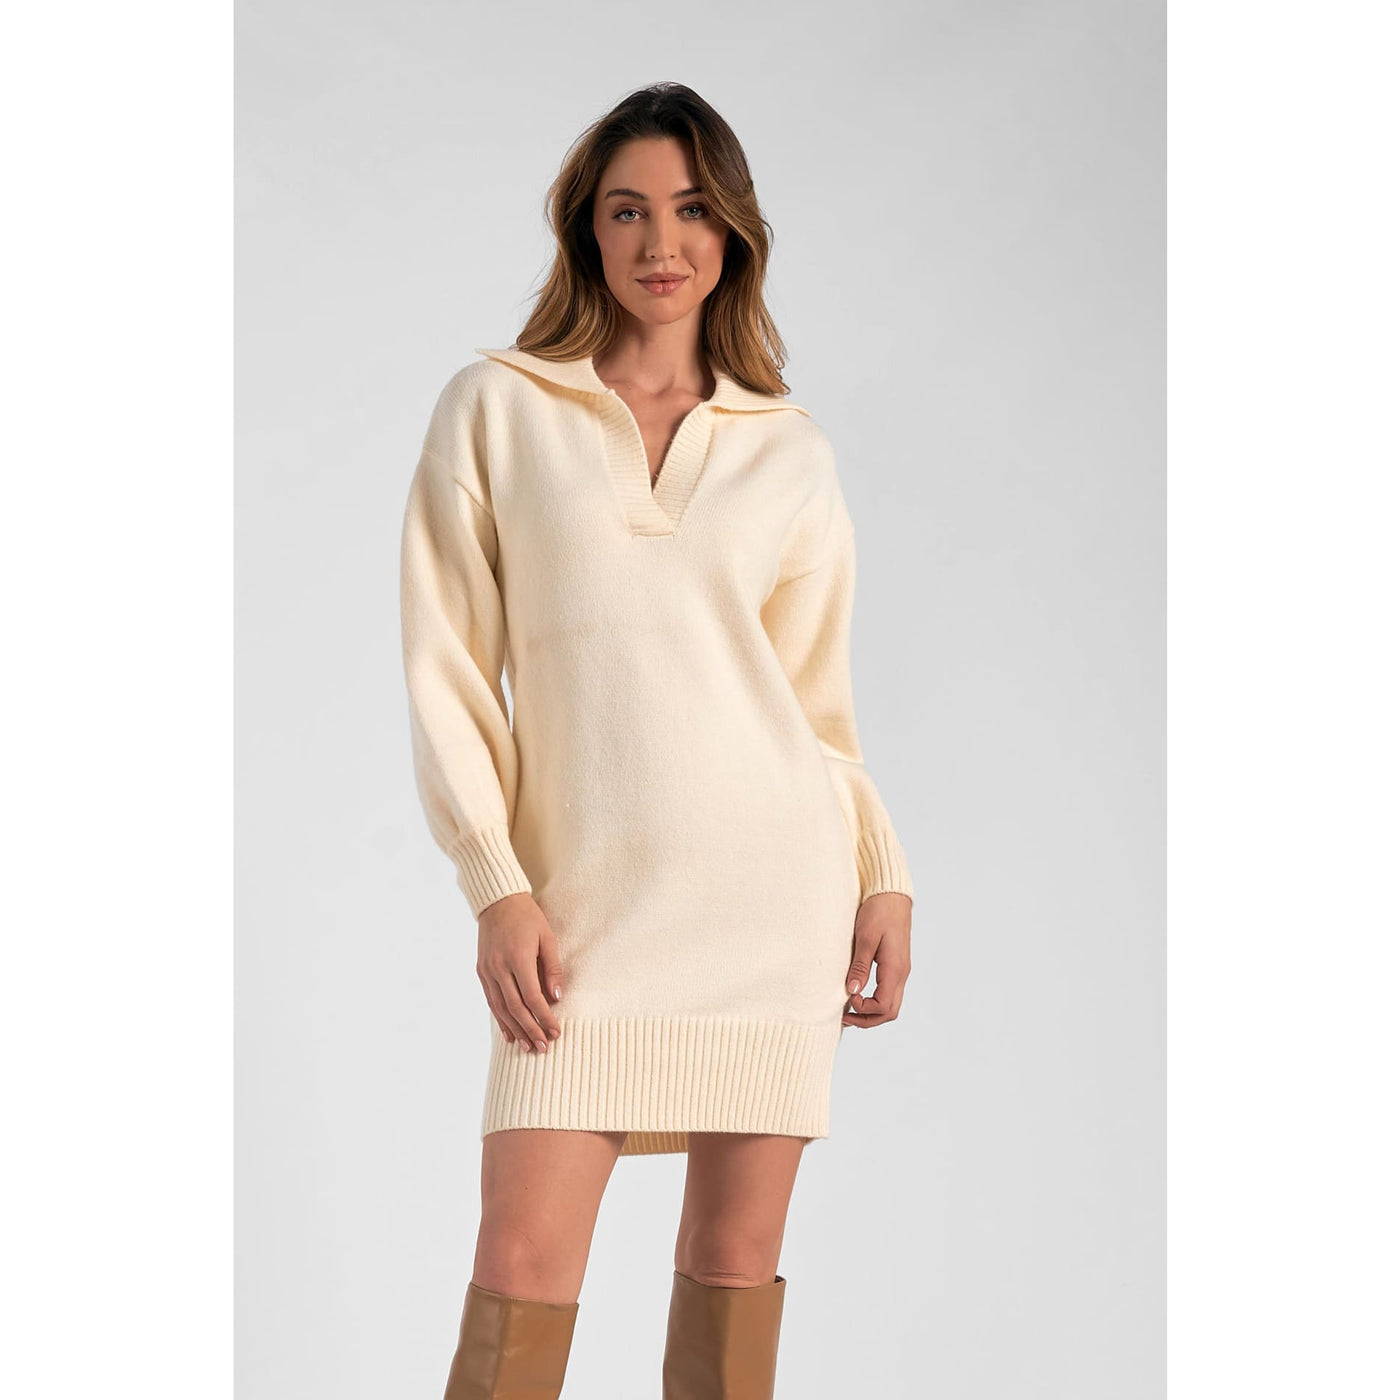 Catching the Vibe Sweater Dress - 170 Casual Dresses/Jumpsuits/Rompers